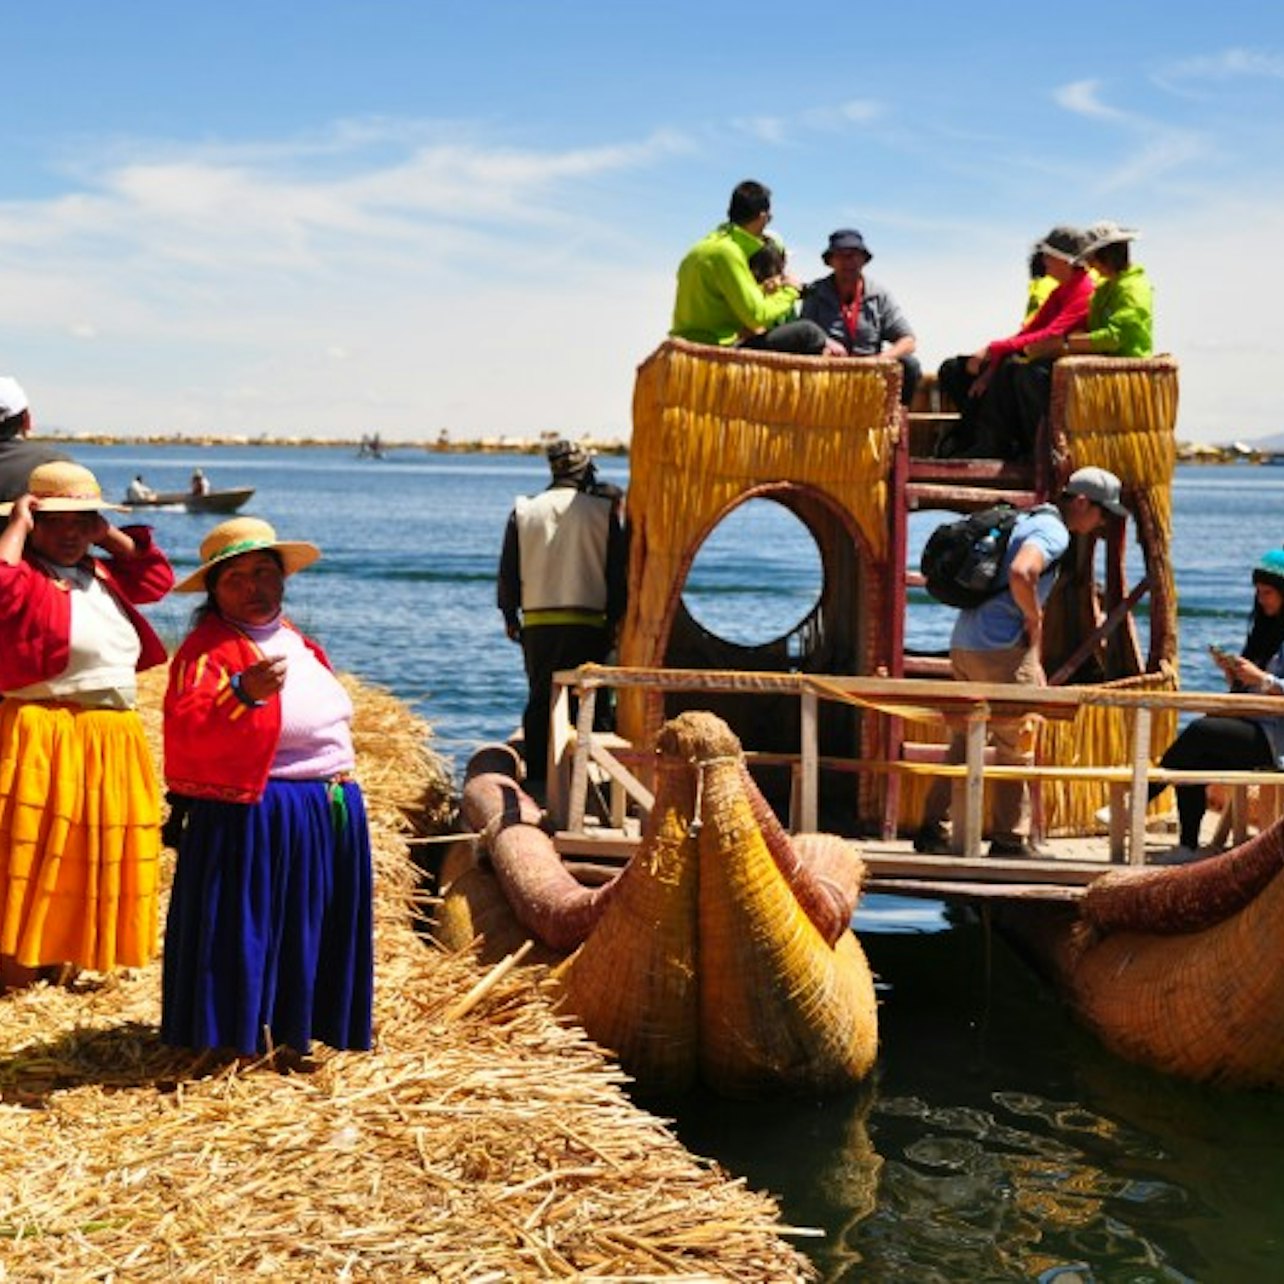 Lake Titicaca Day Tour from Puno - Accommodations in Puno